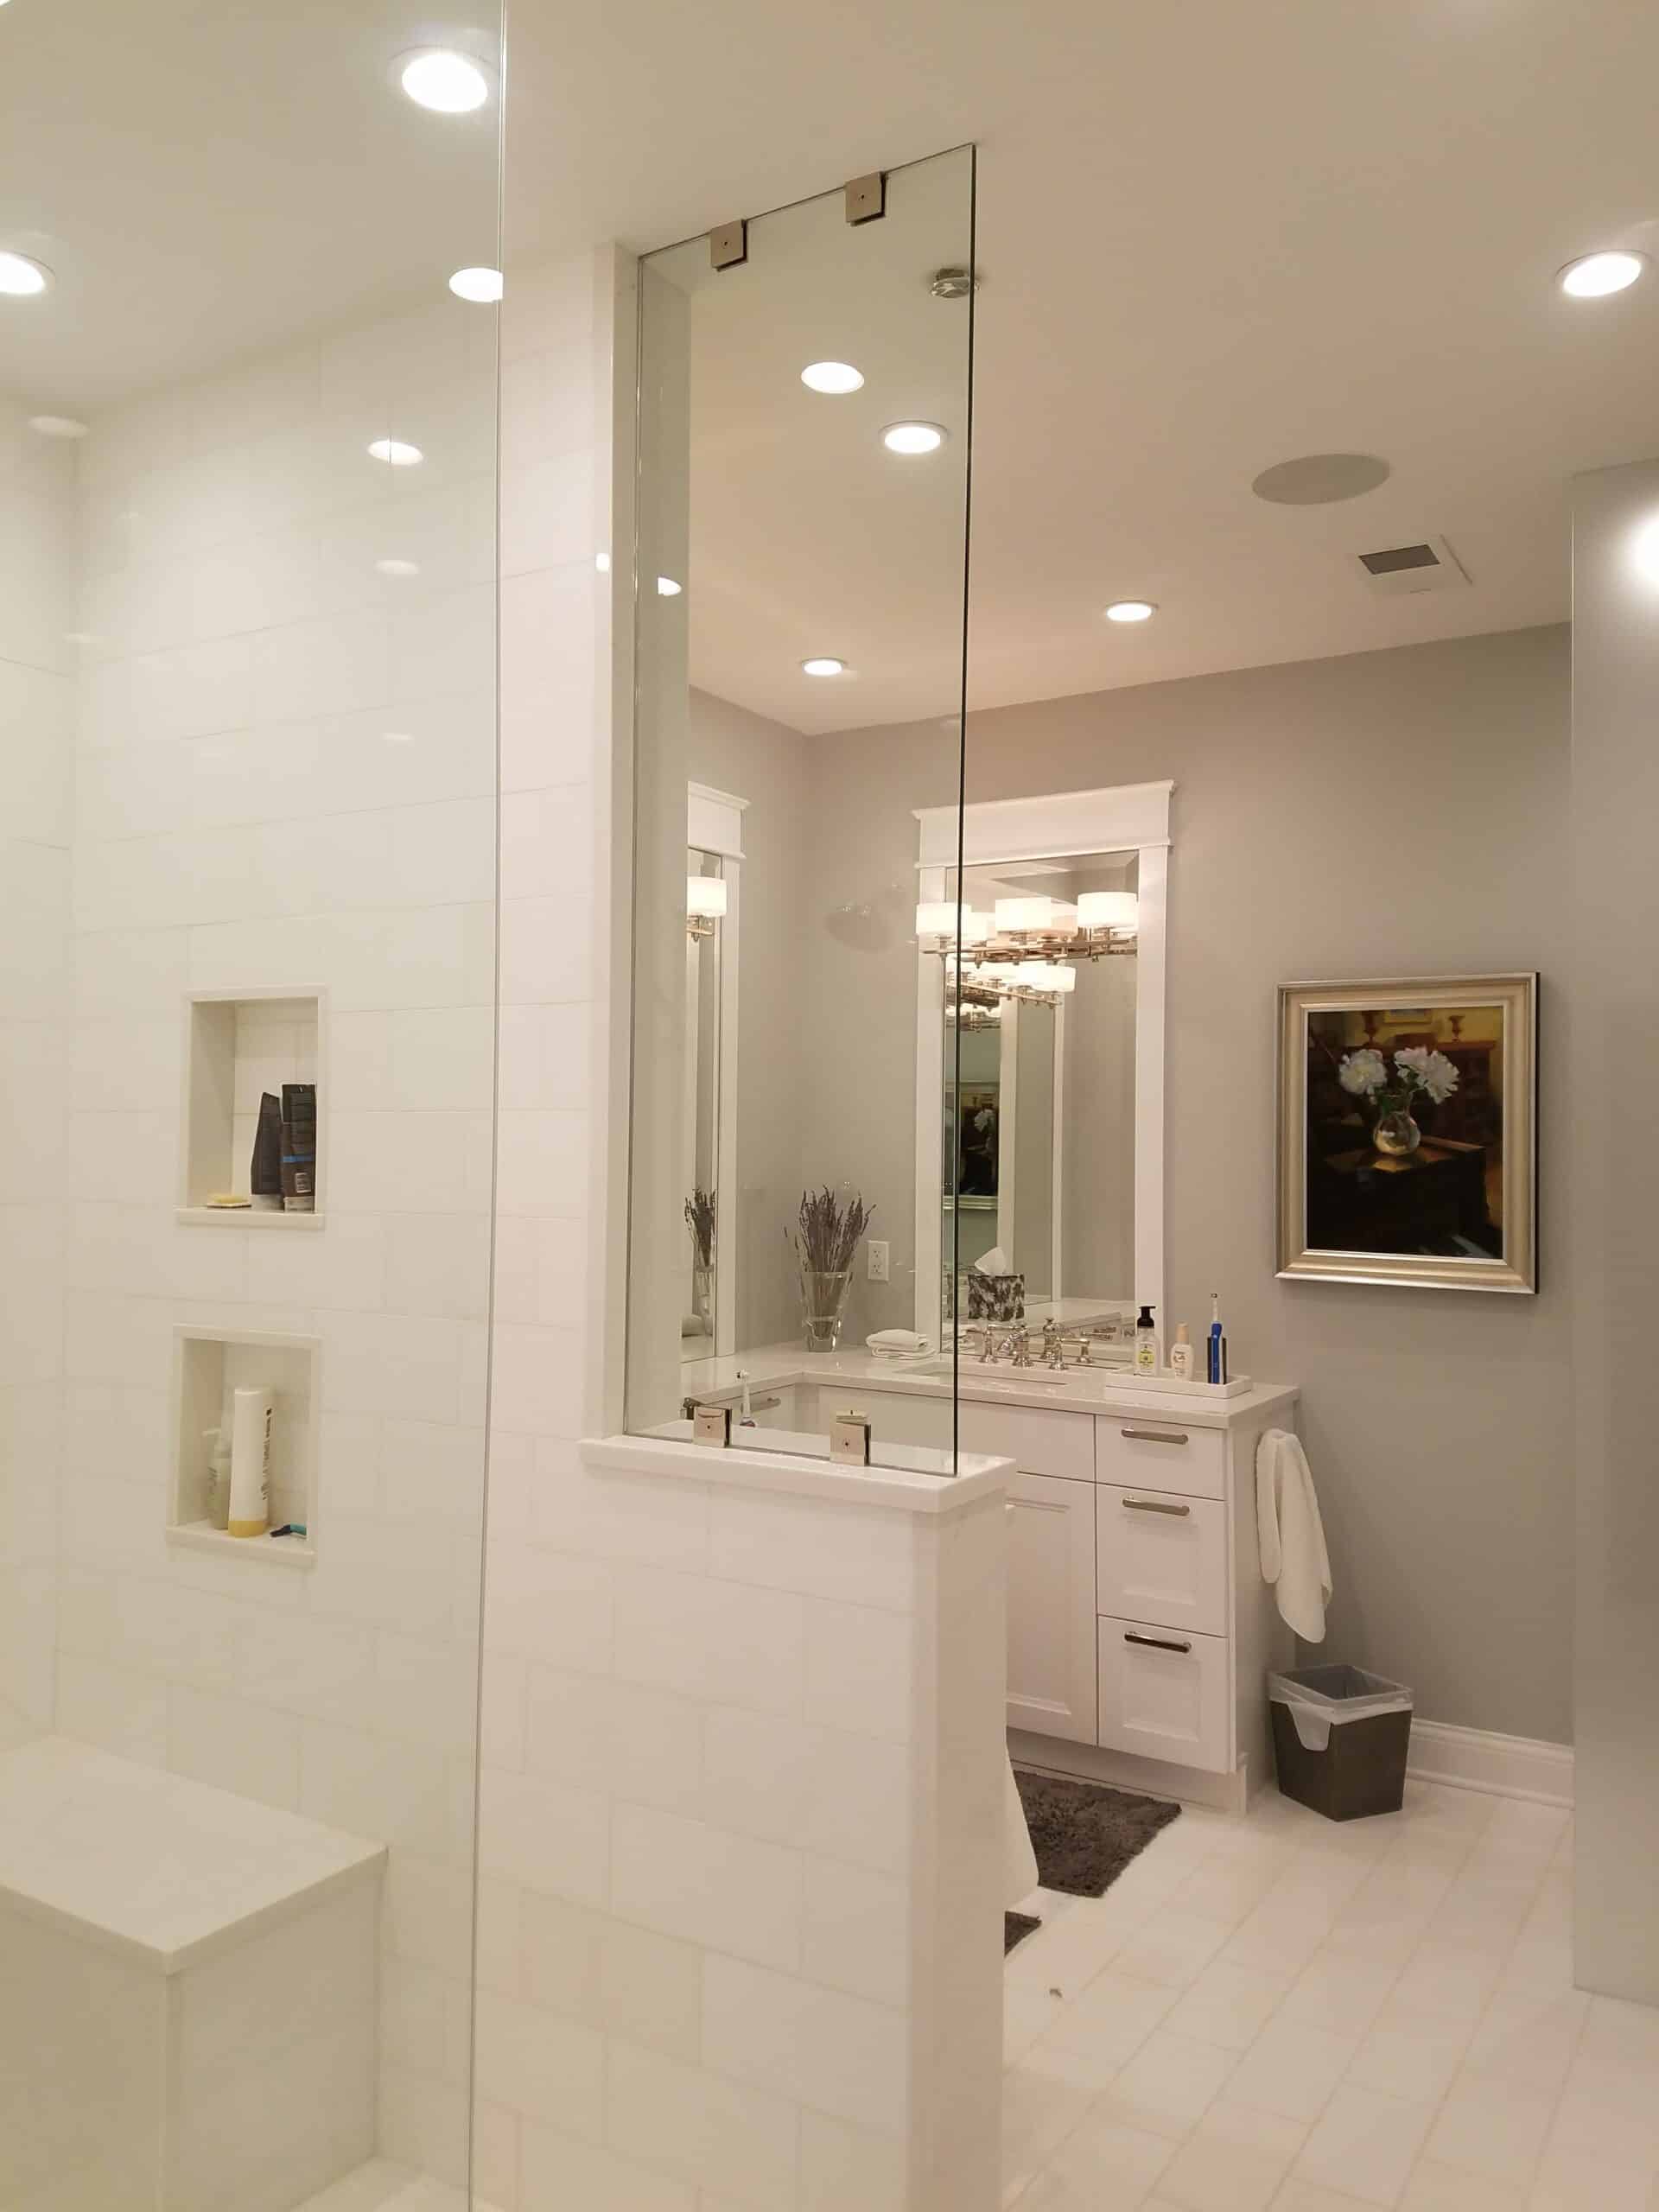 A spacious bathroom remodel featuring a walk in shower and separate vanity area